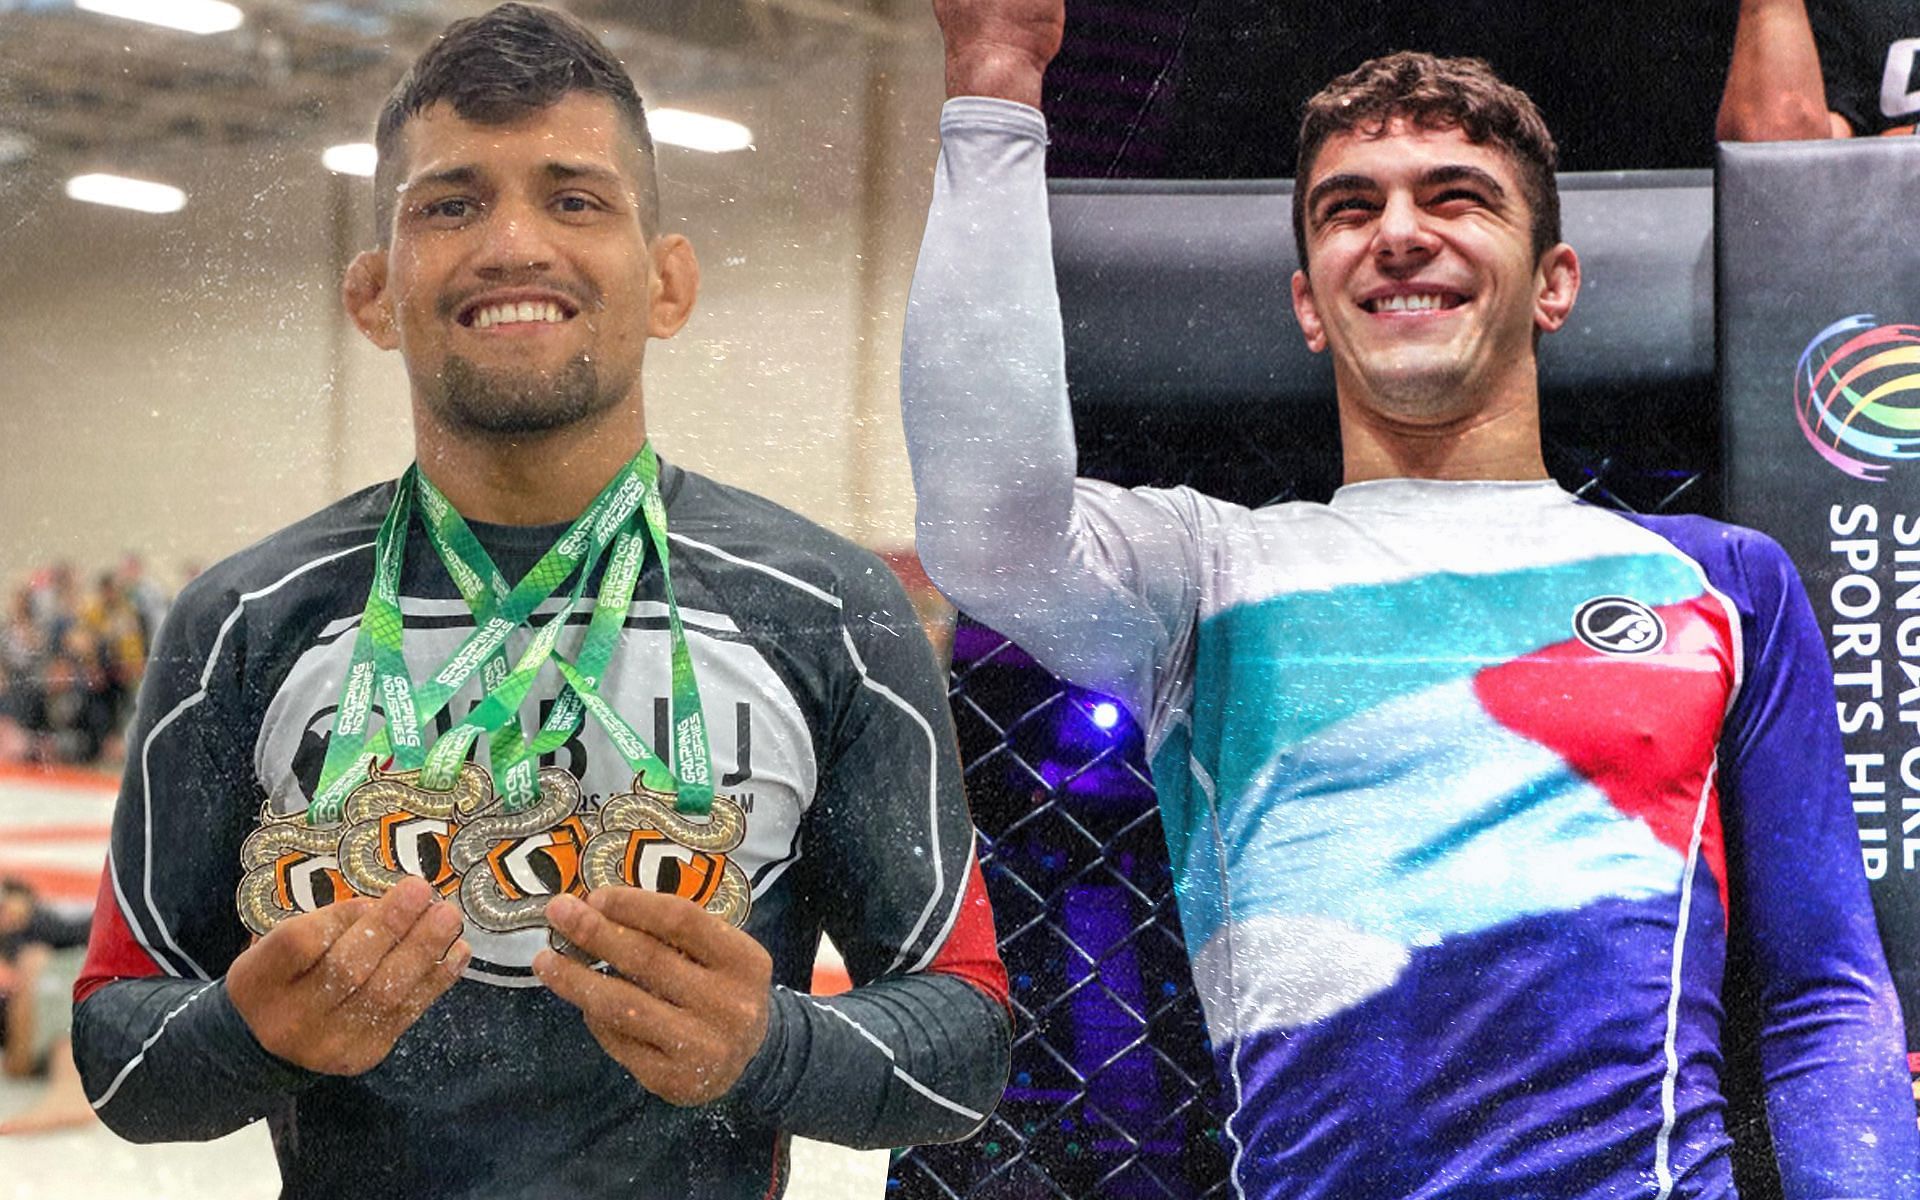 Mikey Musumeci (R) will battle Cleber Sousa (L) for the inaugural ONE flyweight submission grappling world title at ONE on Prime Video 2.